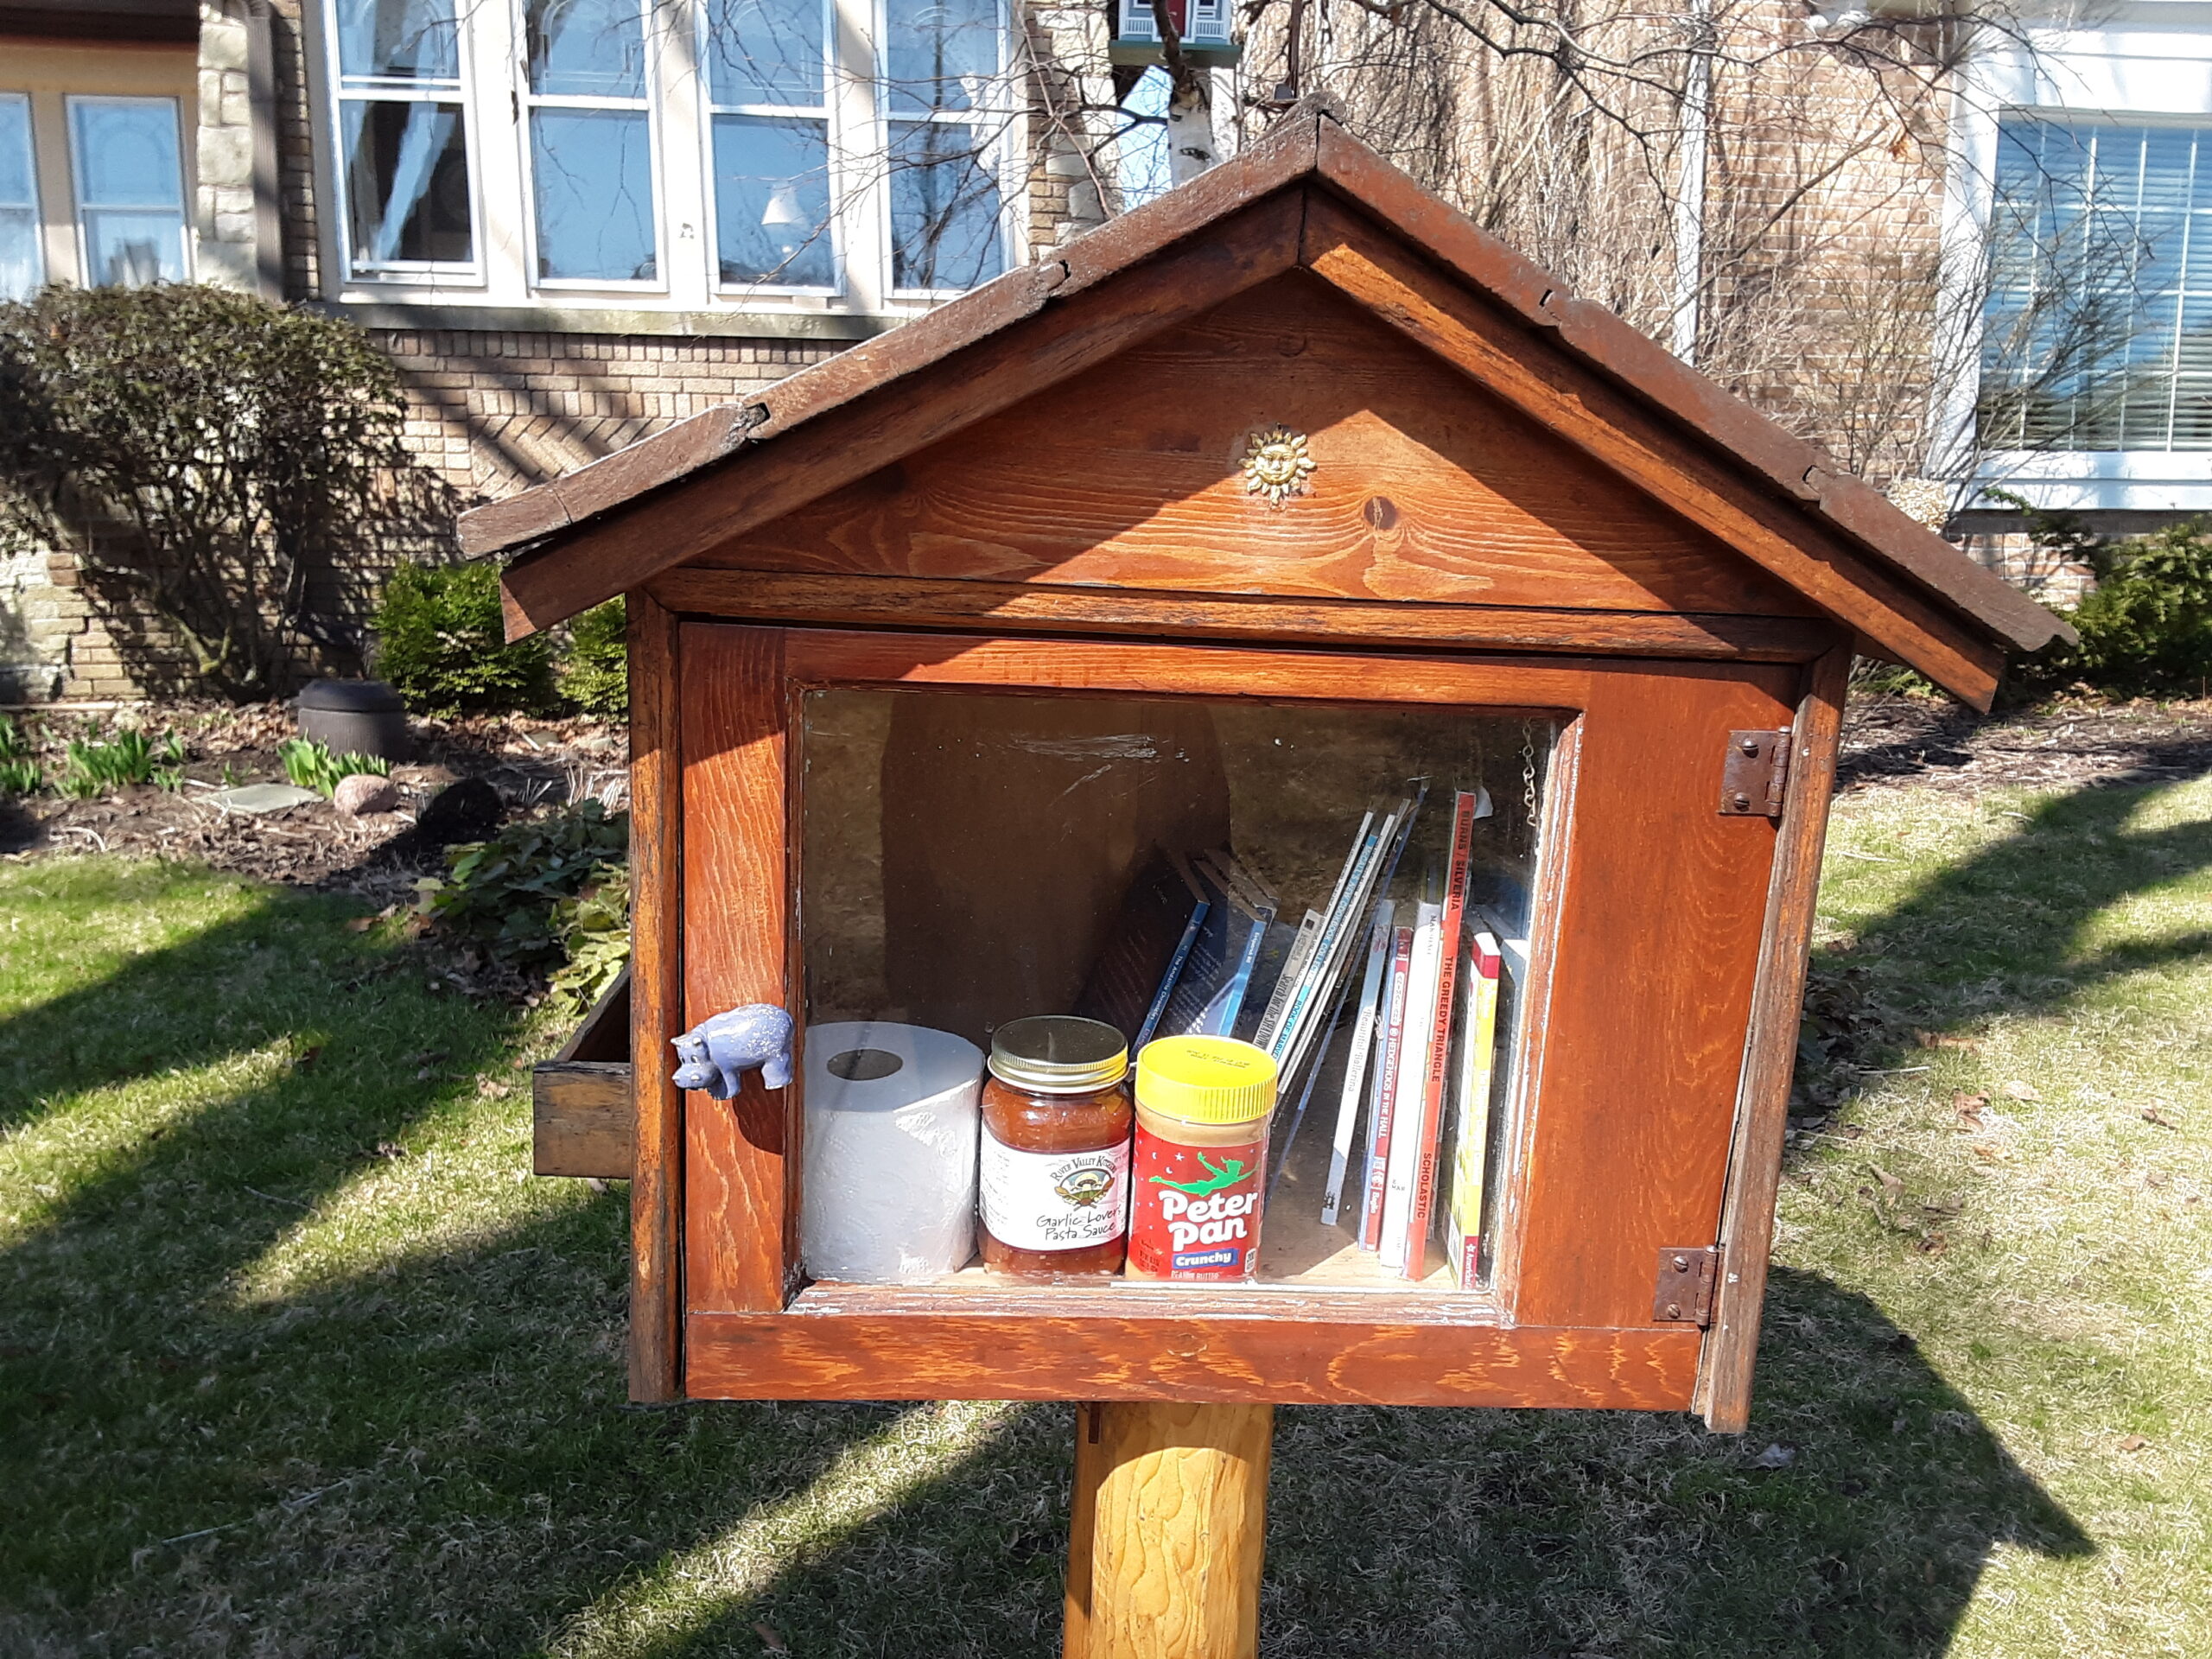 A Little Free Library with books, a roll of toilet paper, jar of spaghetti sauce, jar of peanut butter and chocolate, in Wauwatosa